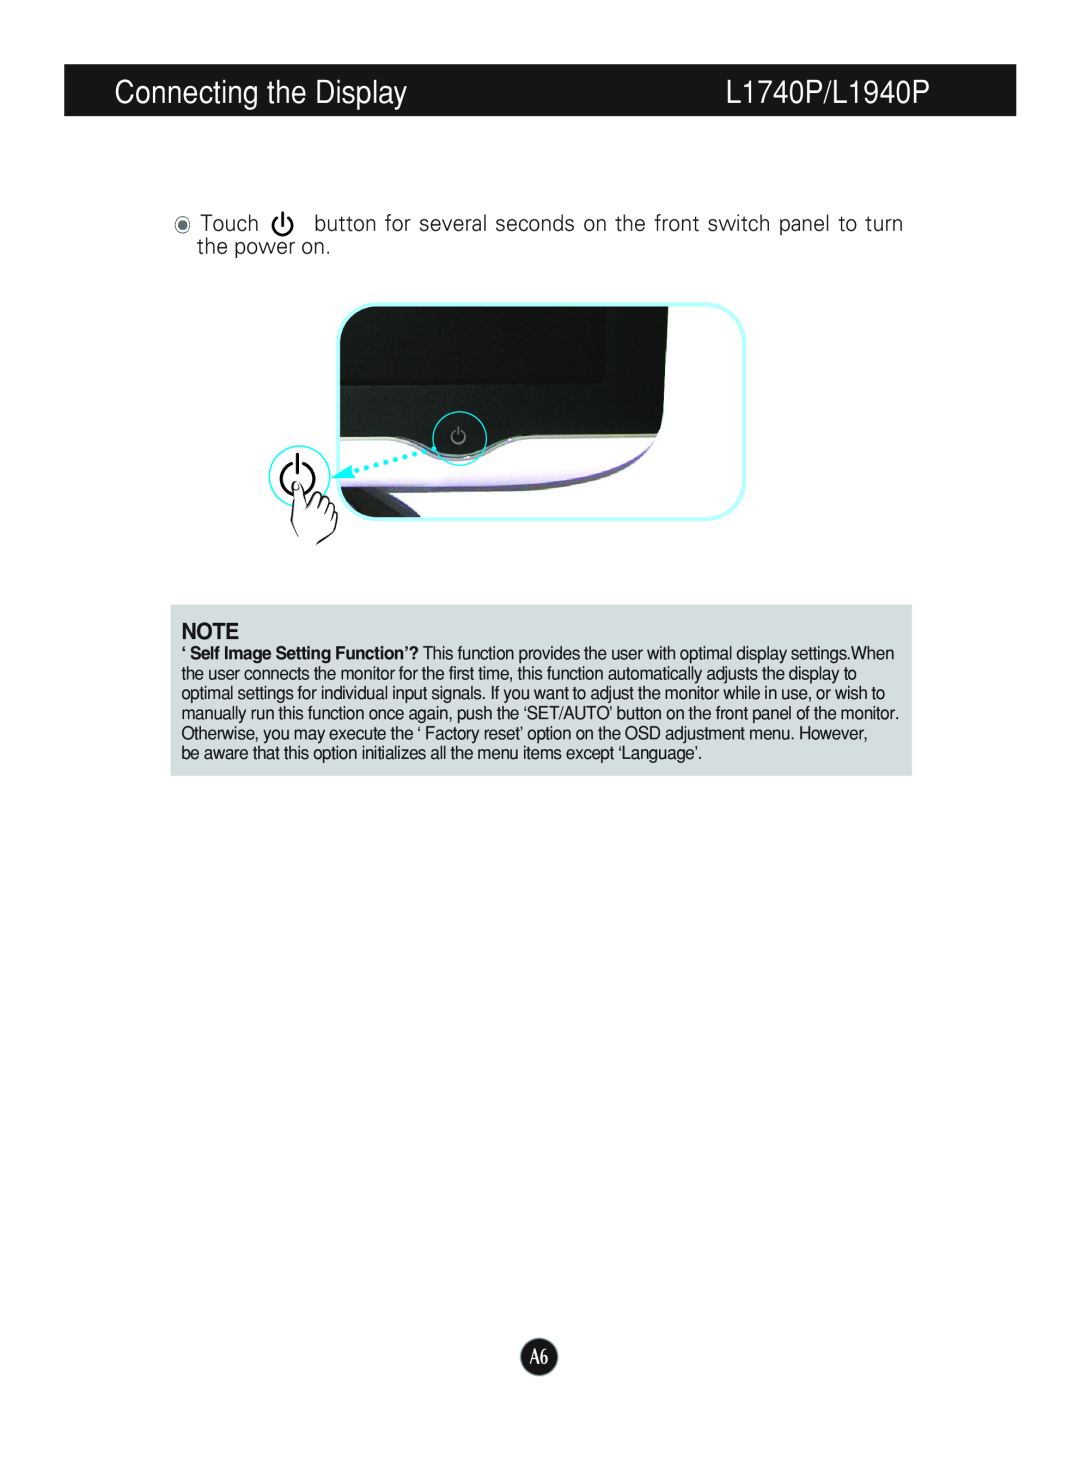 LG Electronics manual L1740P/L1940P, Connecting the Display 